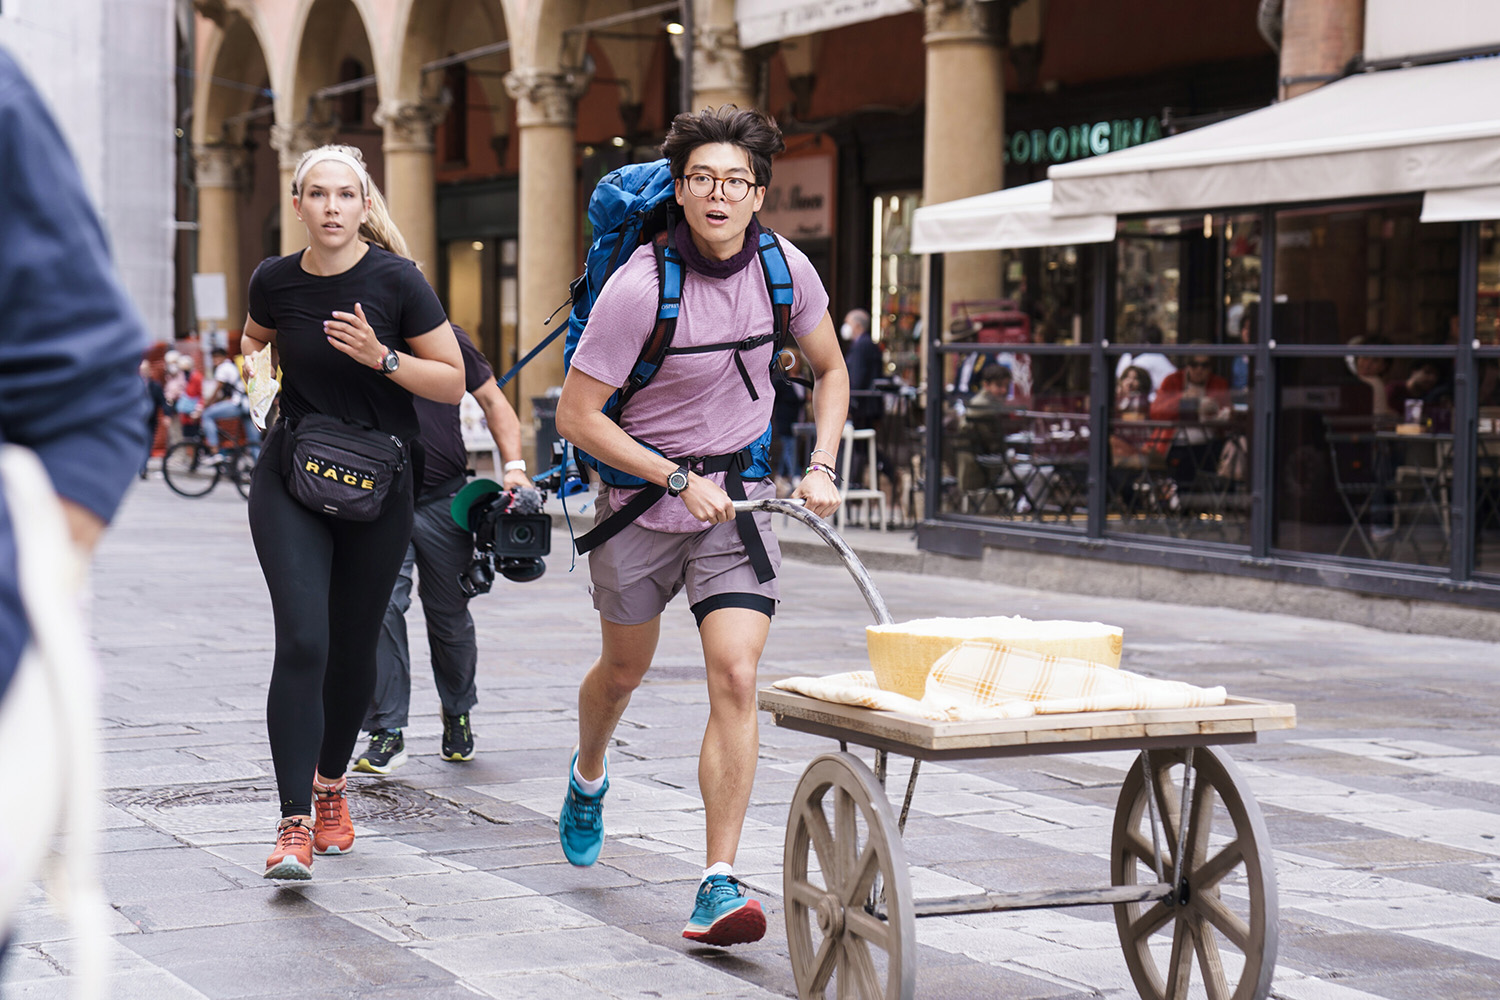 Big Brother alums Claire Rehfuss and Derek Xiao on The Amazing Race Season 34